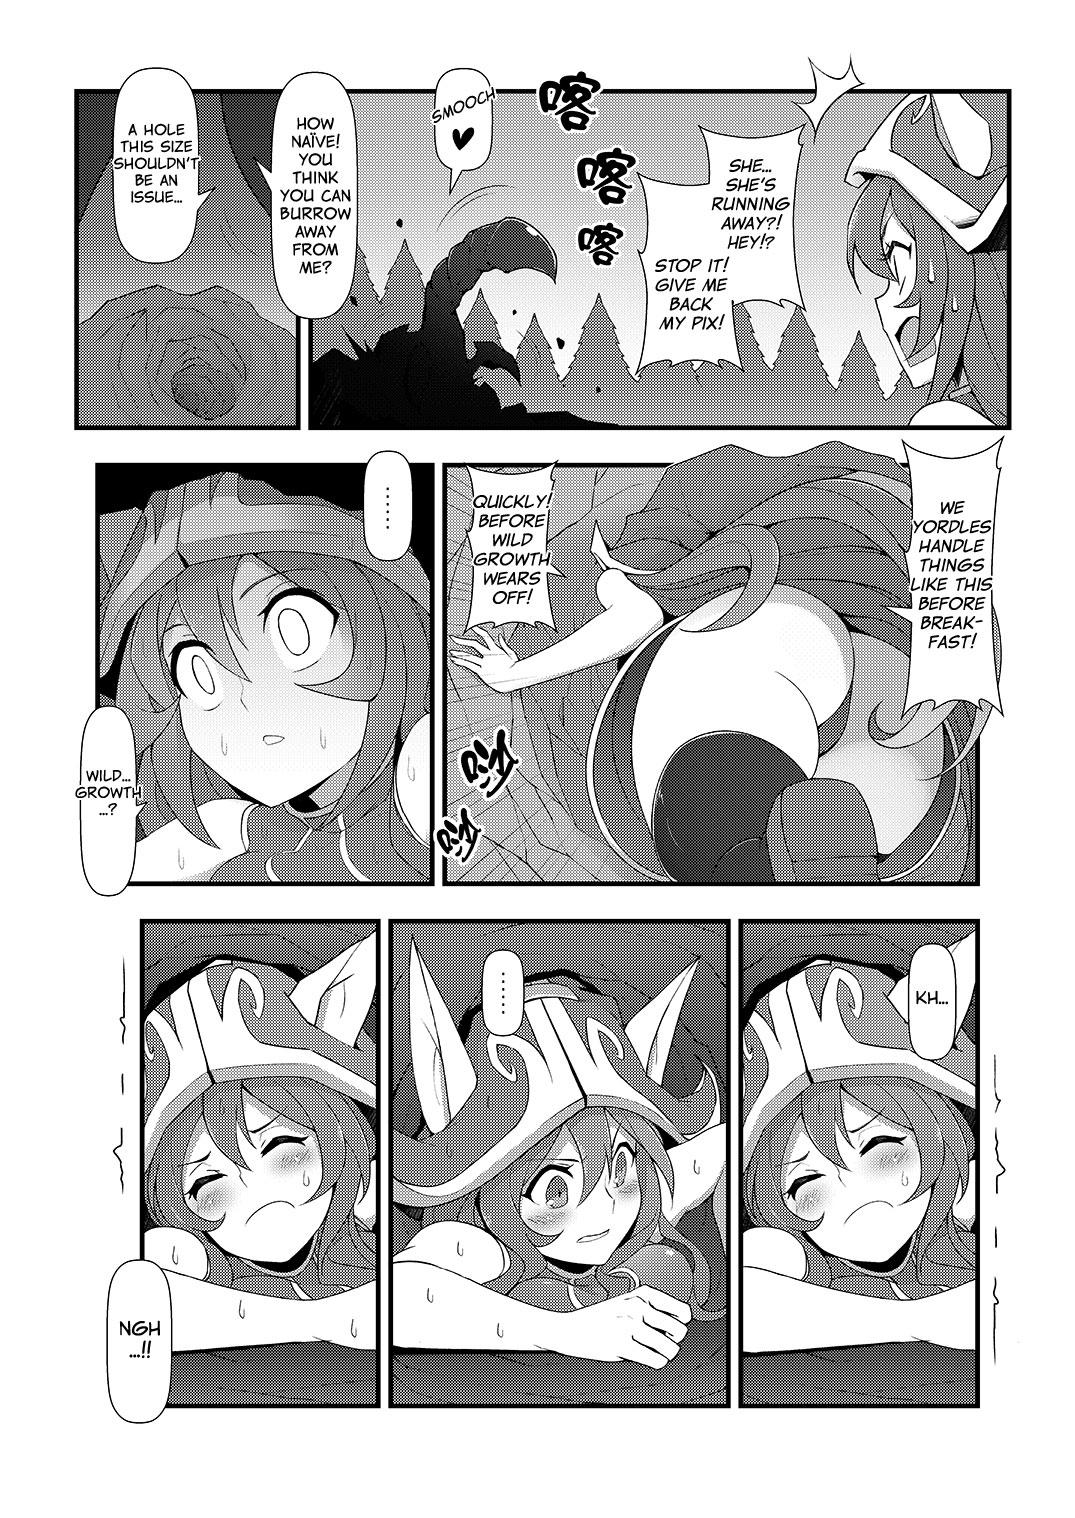 And ININ Renmei 2 | ININ League 2 - League of legends Natural Boobs - Page 4